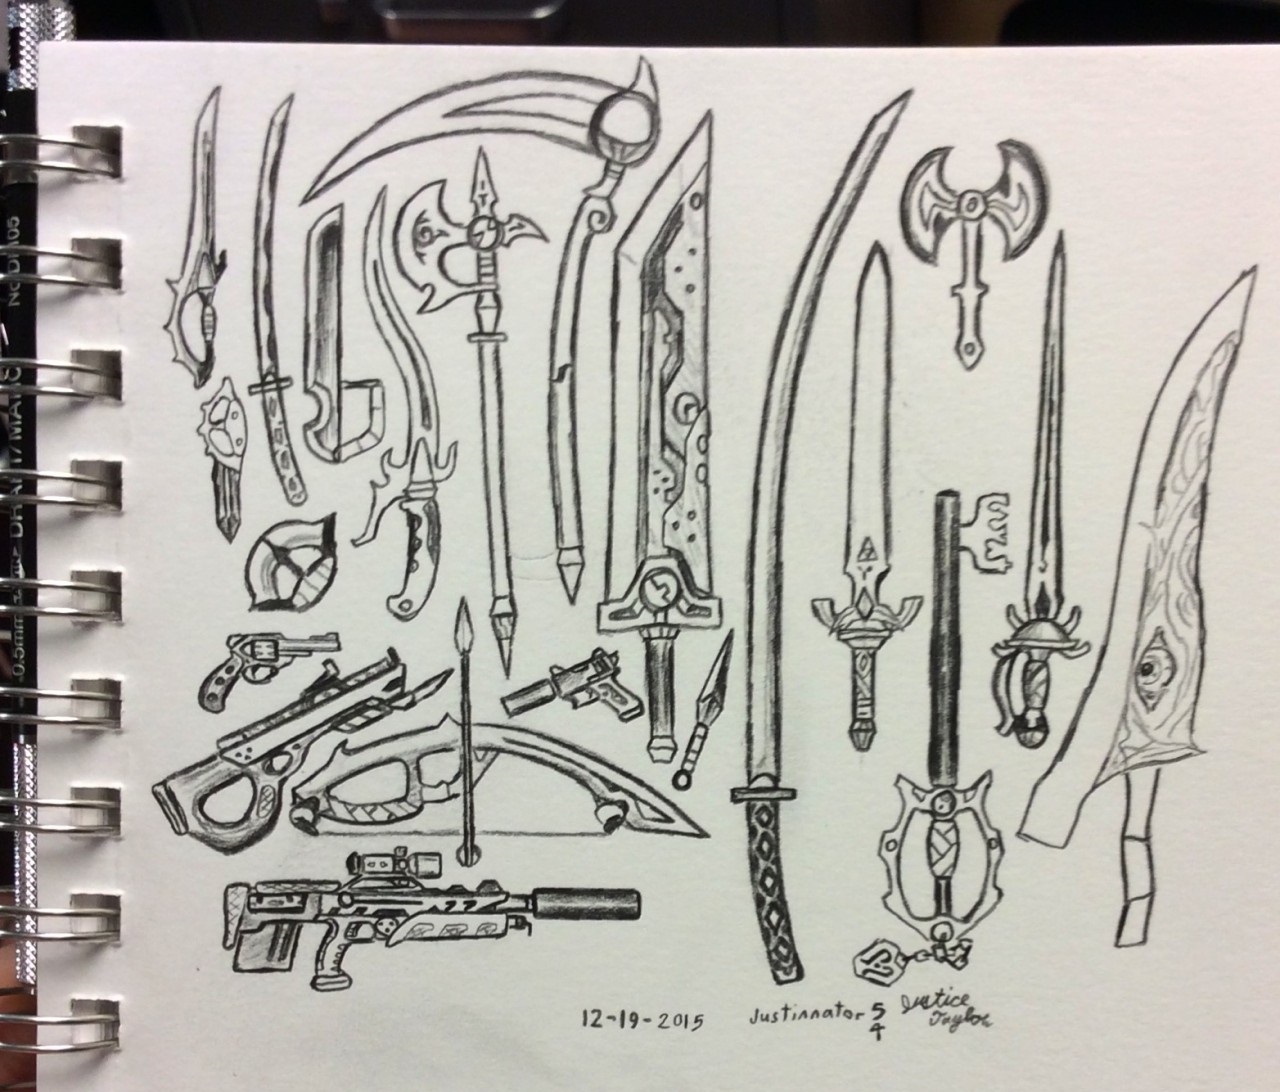 Weapon sketches including Master Sword by Justinnator6